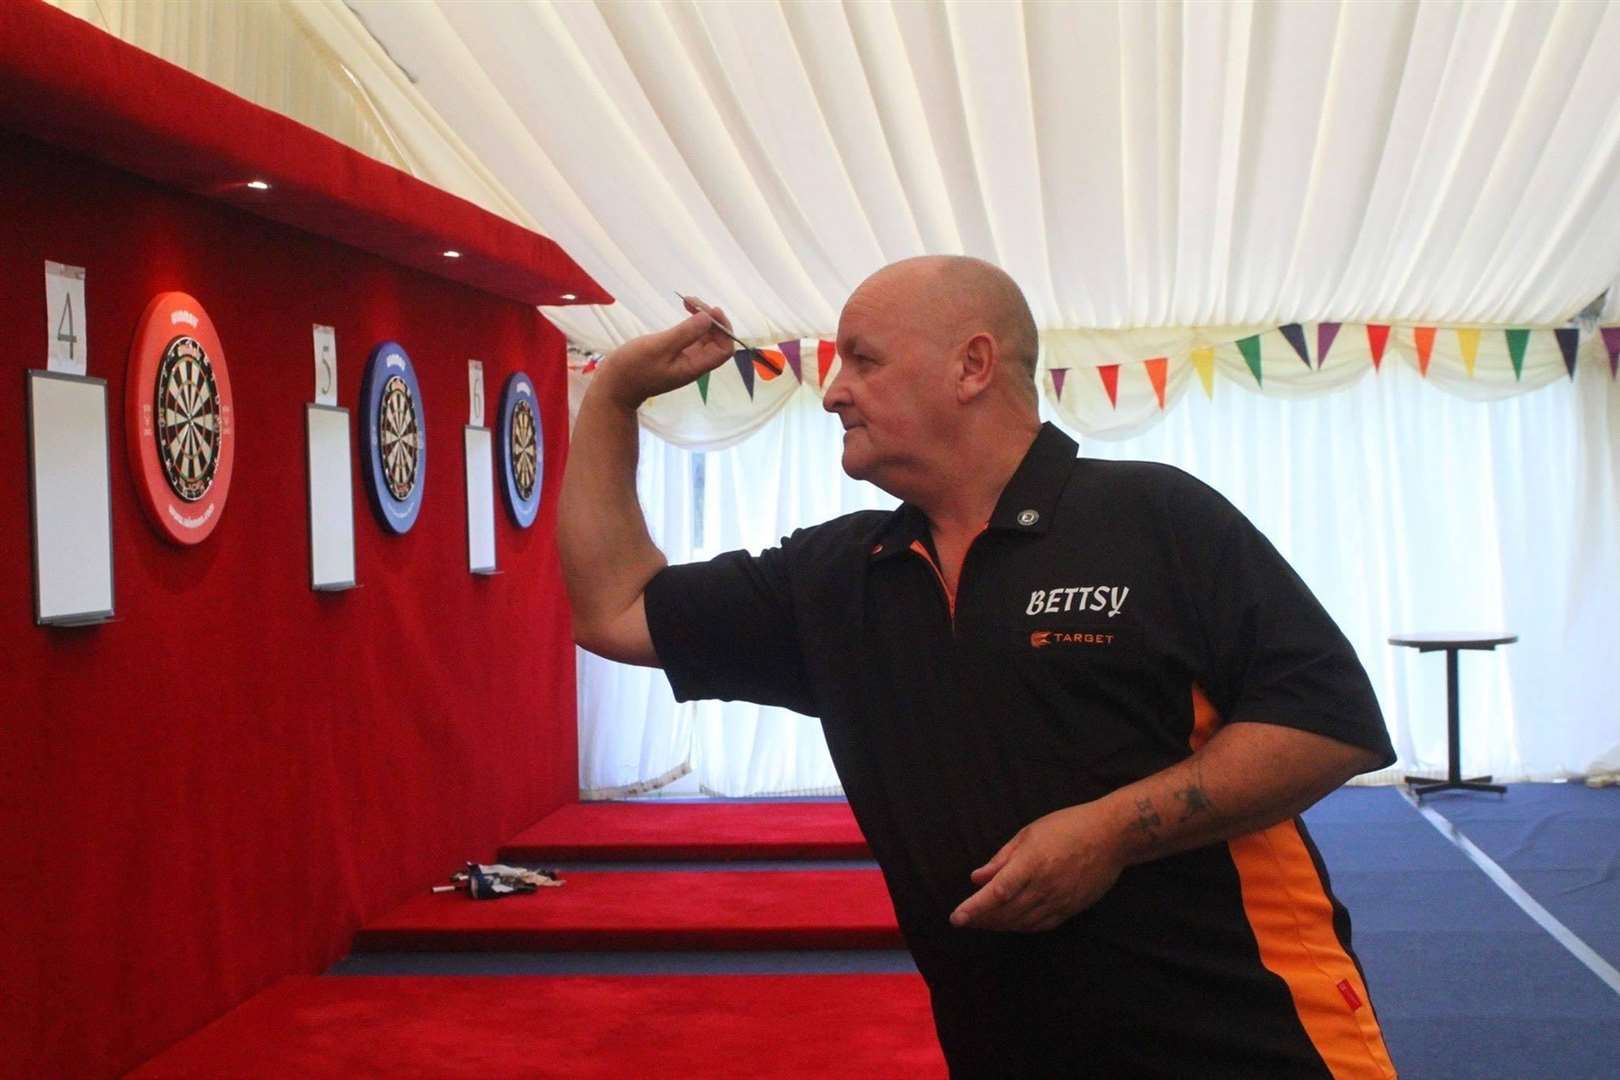 Andy Betts was a keen darts player